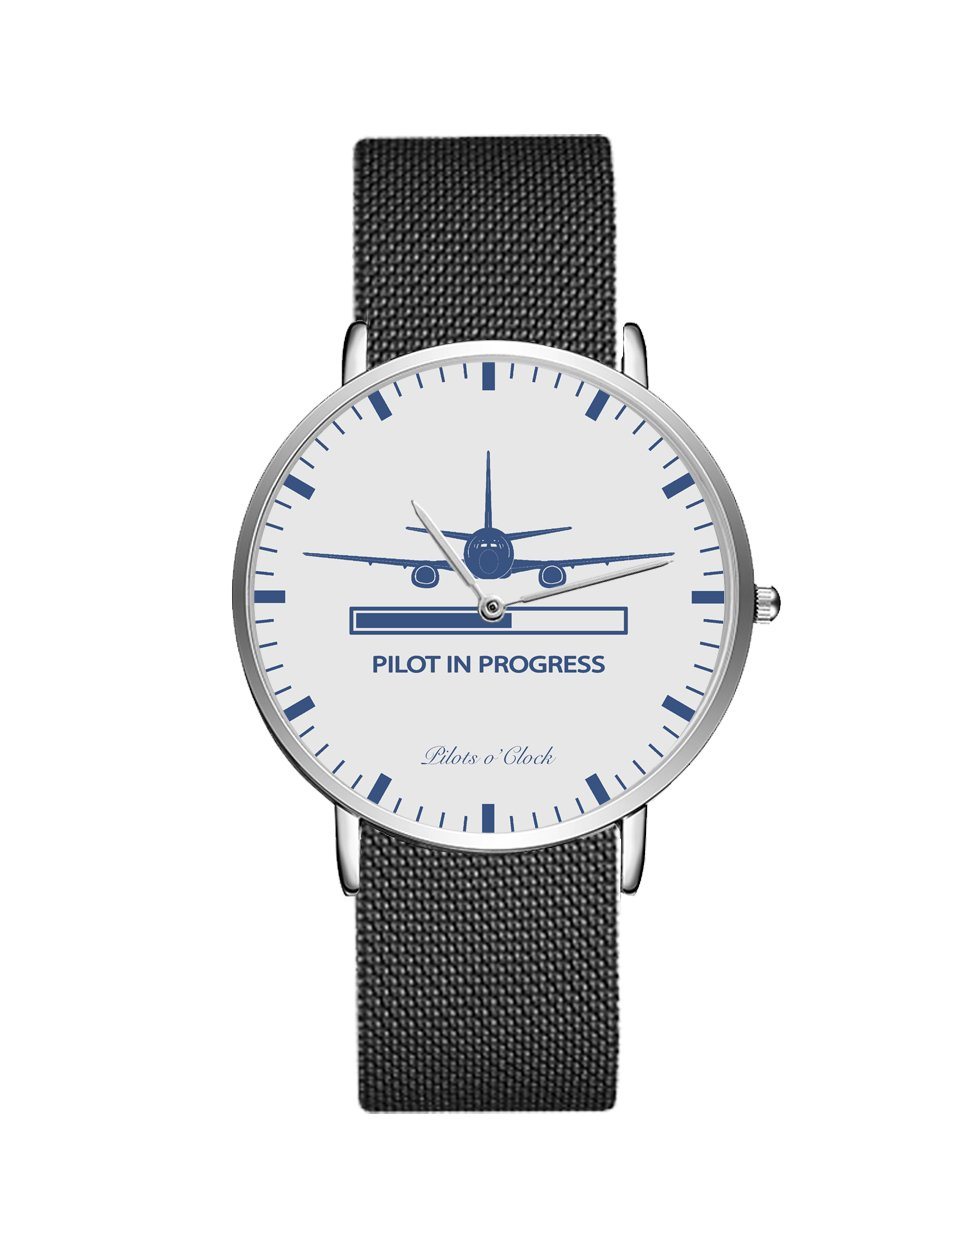 Pilot In Progress Stainless Steel Strap Watches Pilot Eyes Store Silver & Black Stainless Steel Strap 